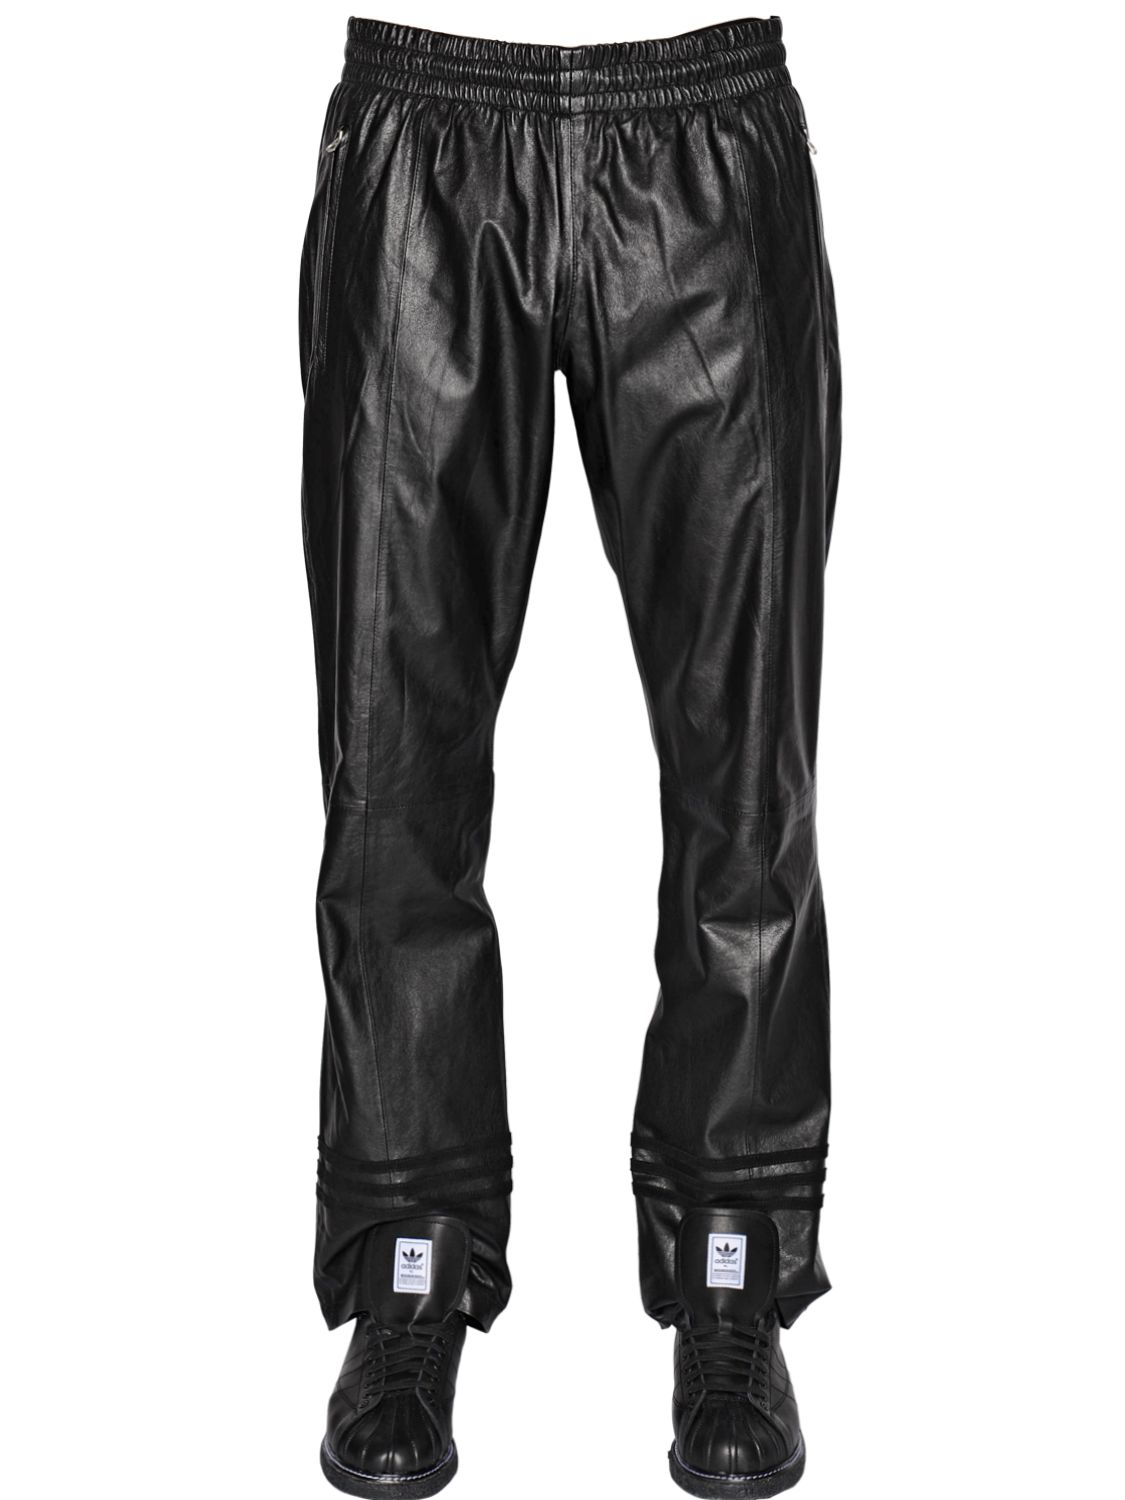 Lyst - Adidas Originals Straight Leather Pants in Black for Men